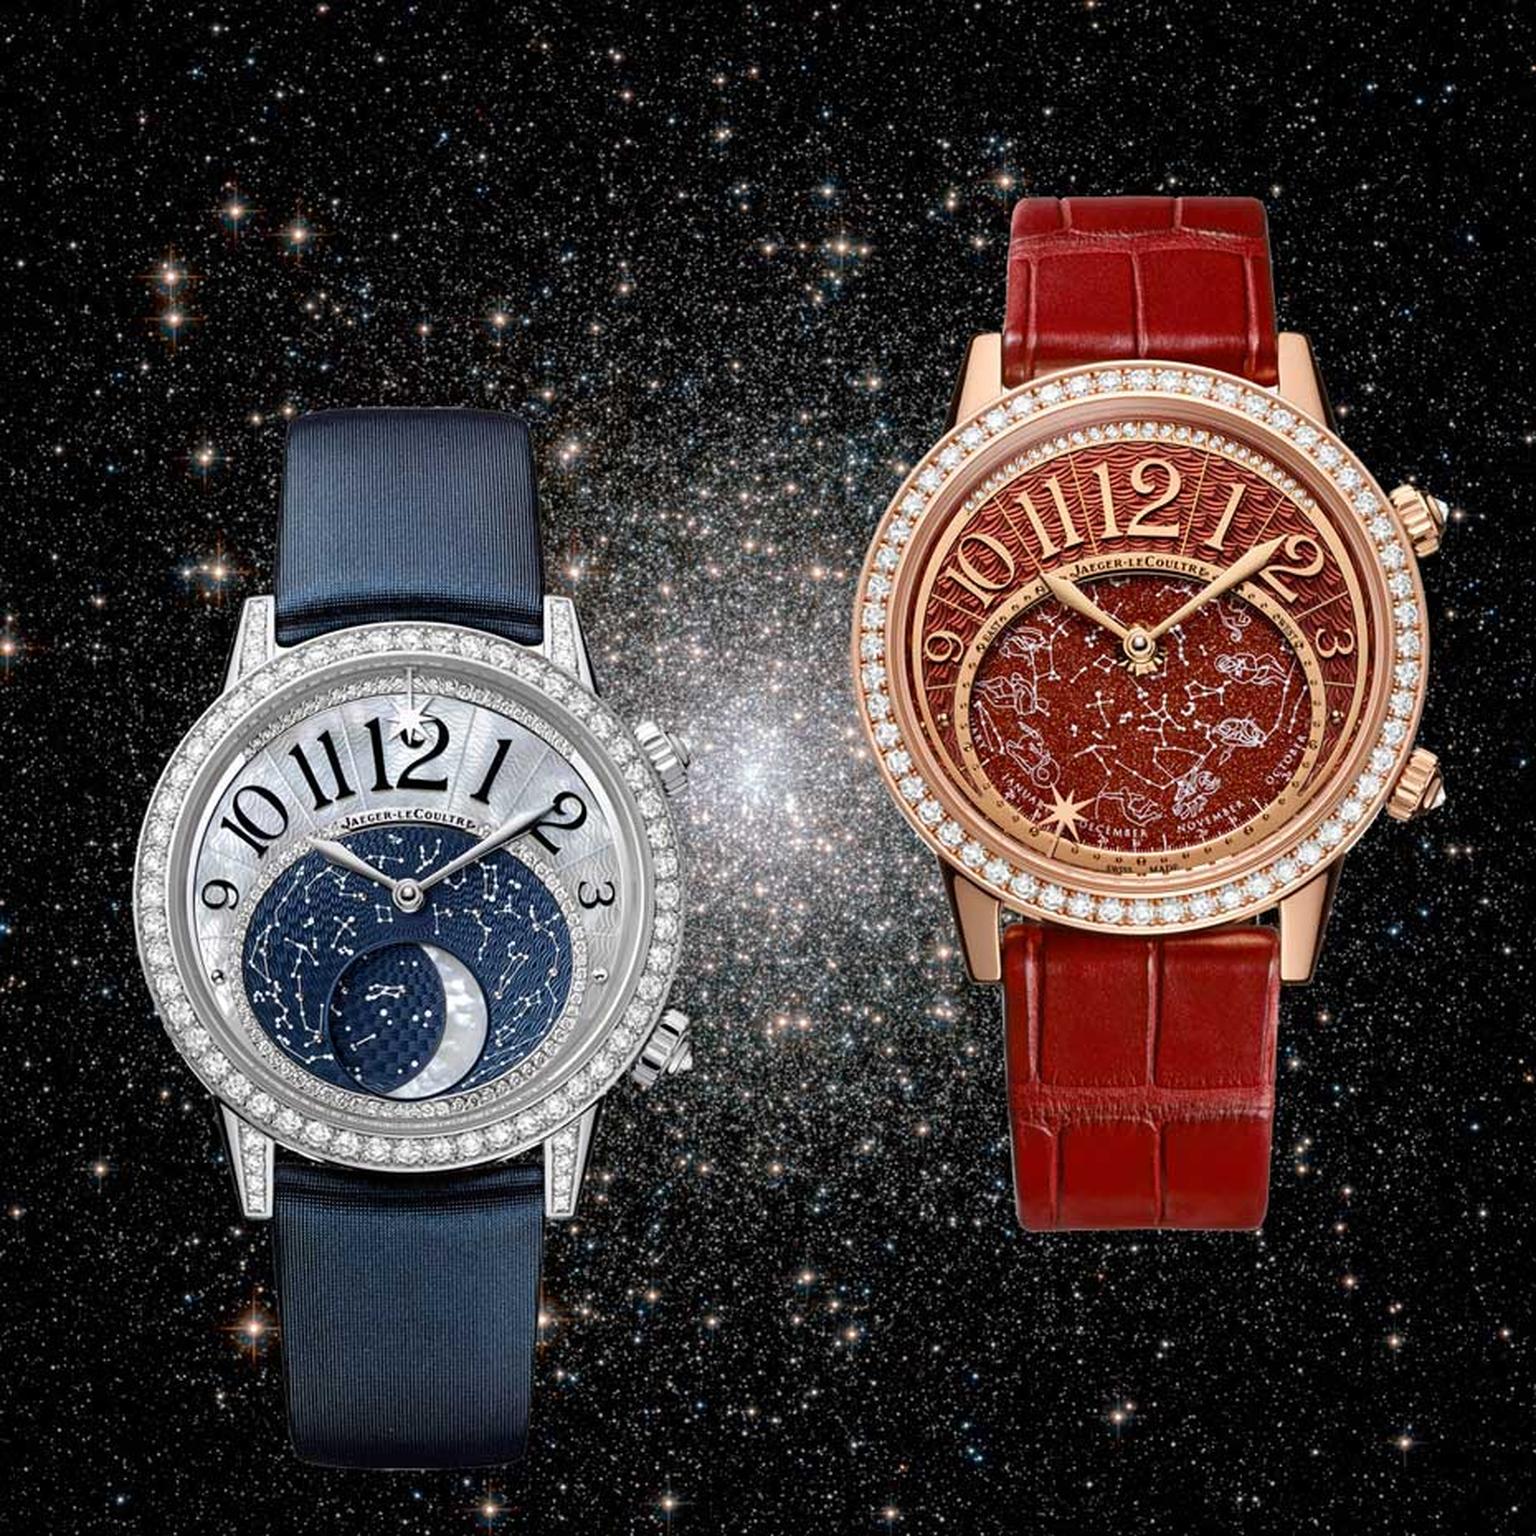 Celebrating astronomy this year, Jaeger-LeCoultre watches has made a date with the biggest star of them all for its Rendez-Vous Celestial, which captures the fiery light of the Sun, and with the soft glow of the Moon with the Rendez-Vous Moon.